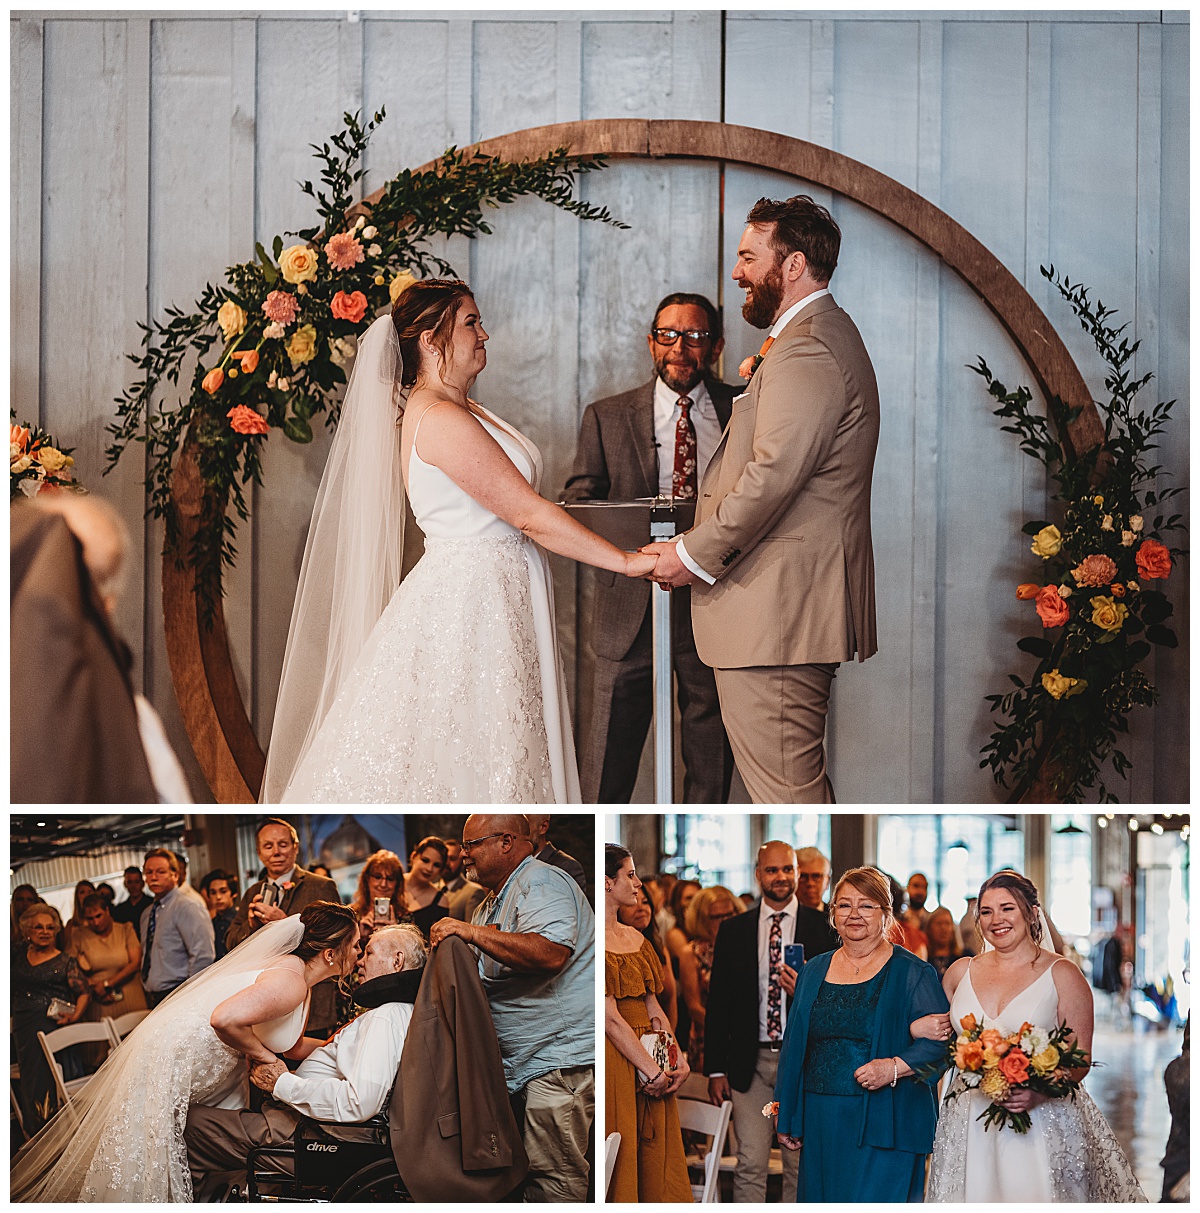 Wedding ceremony pictures for a summer wedding at Mainstreet Ballroom captured by Brittany Dunbar Photography, an Ellicott City Wedding Photographer.